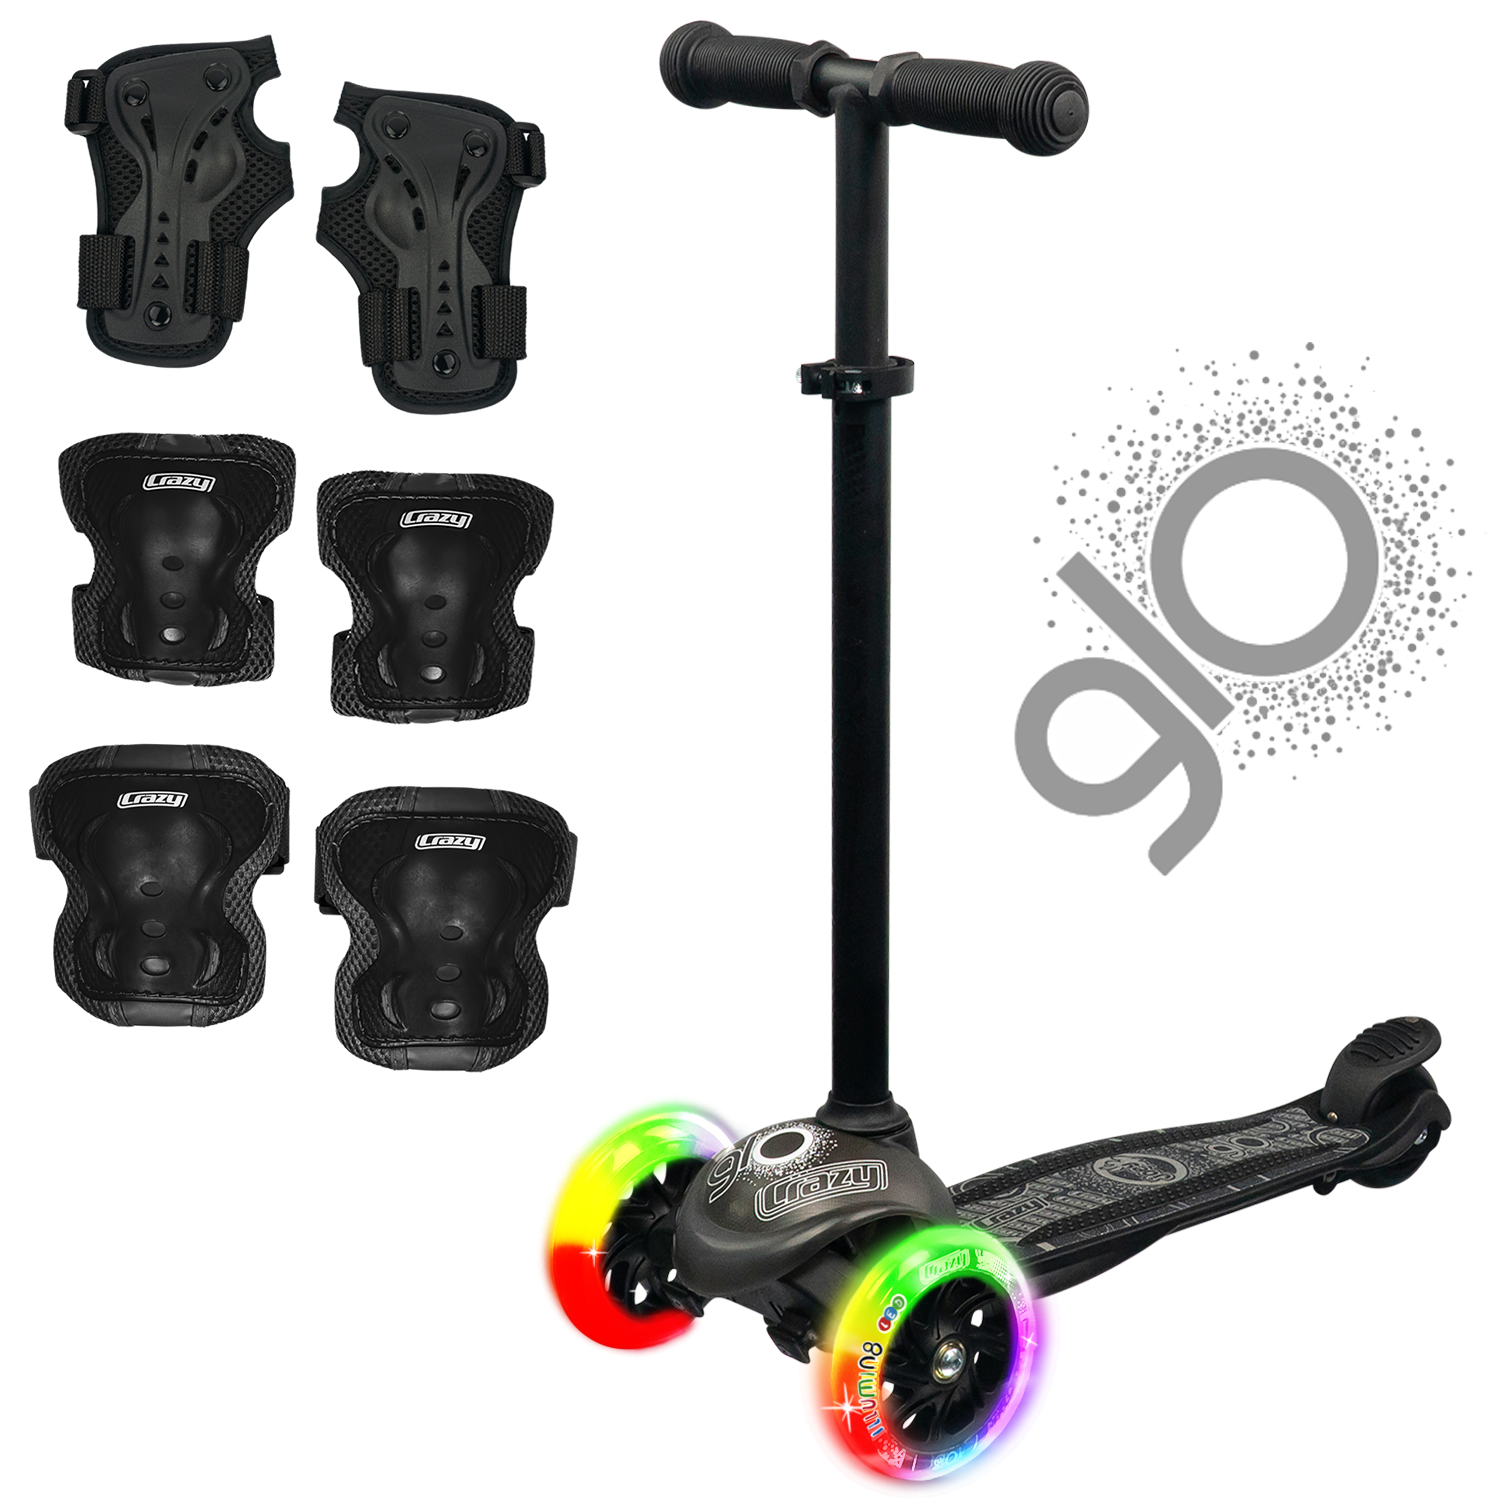 Kick Scooters for Kids - LED light Wheels and protective gear set included